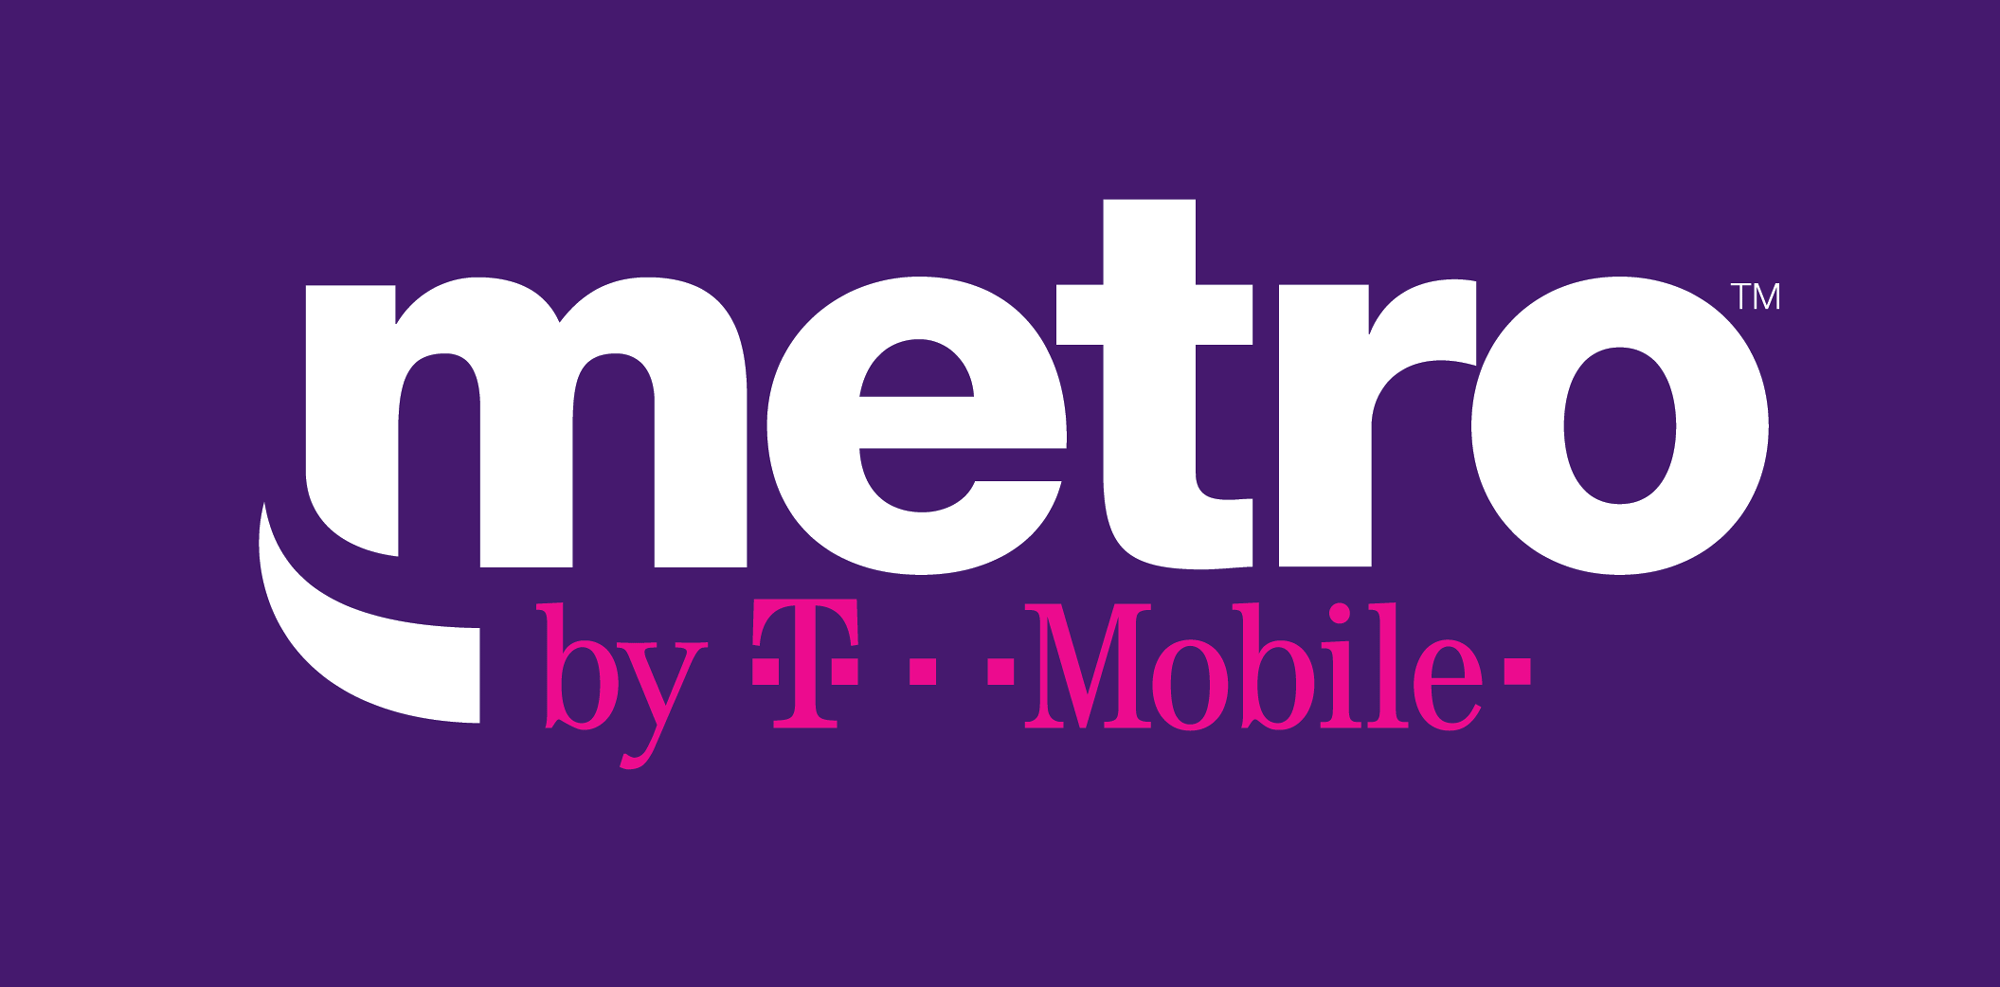 Metro Logo - Brand New: New Name and Logo for Metro by T-Mobile